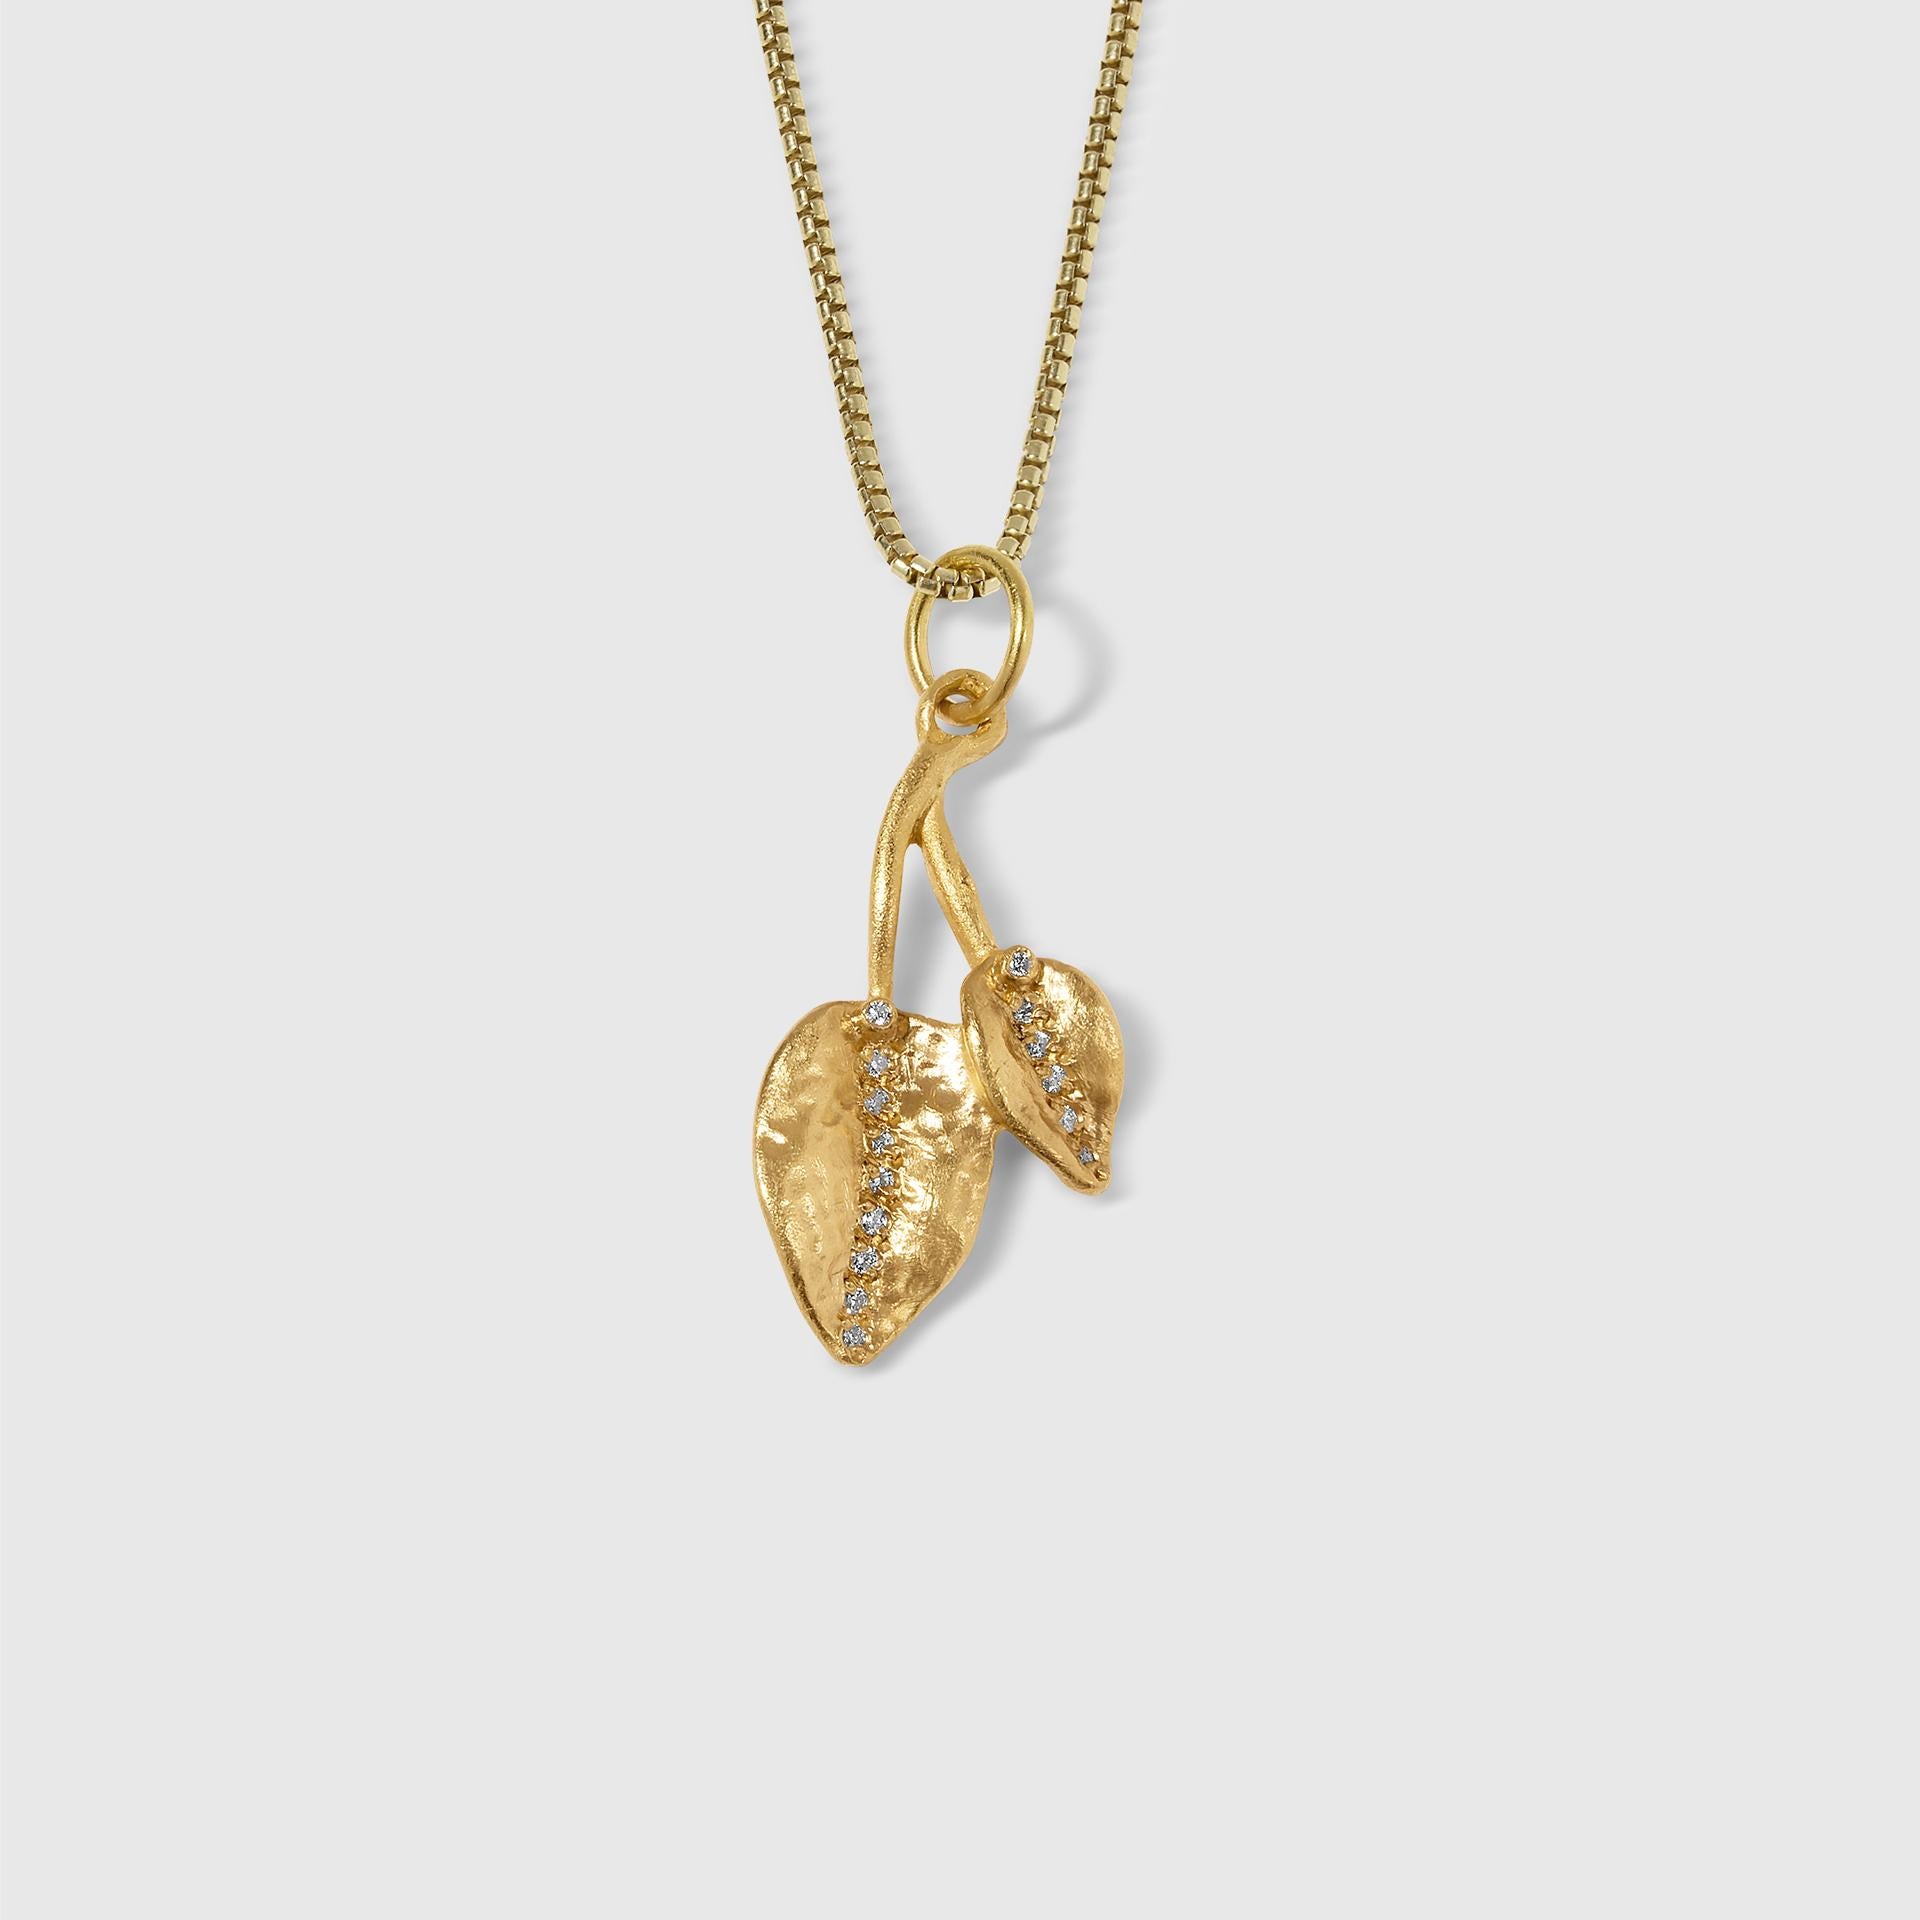 Double Leaf Charm Pendant Necklace with Diamonds, 24kt Solid Gold by Prehistoric Works of Istanbul, Turkey. These pendants look great alone or paired with other coin pendants or with miniature pendants. Measures 14mm x 27mm. Comes with 16